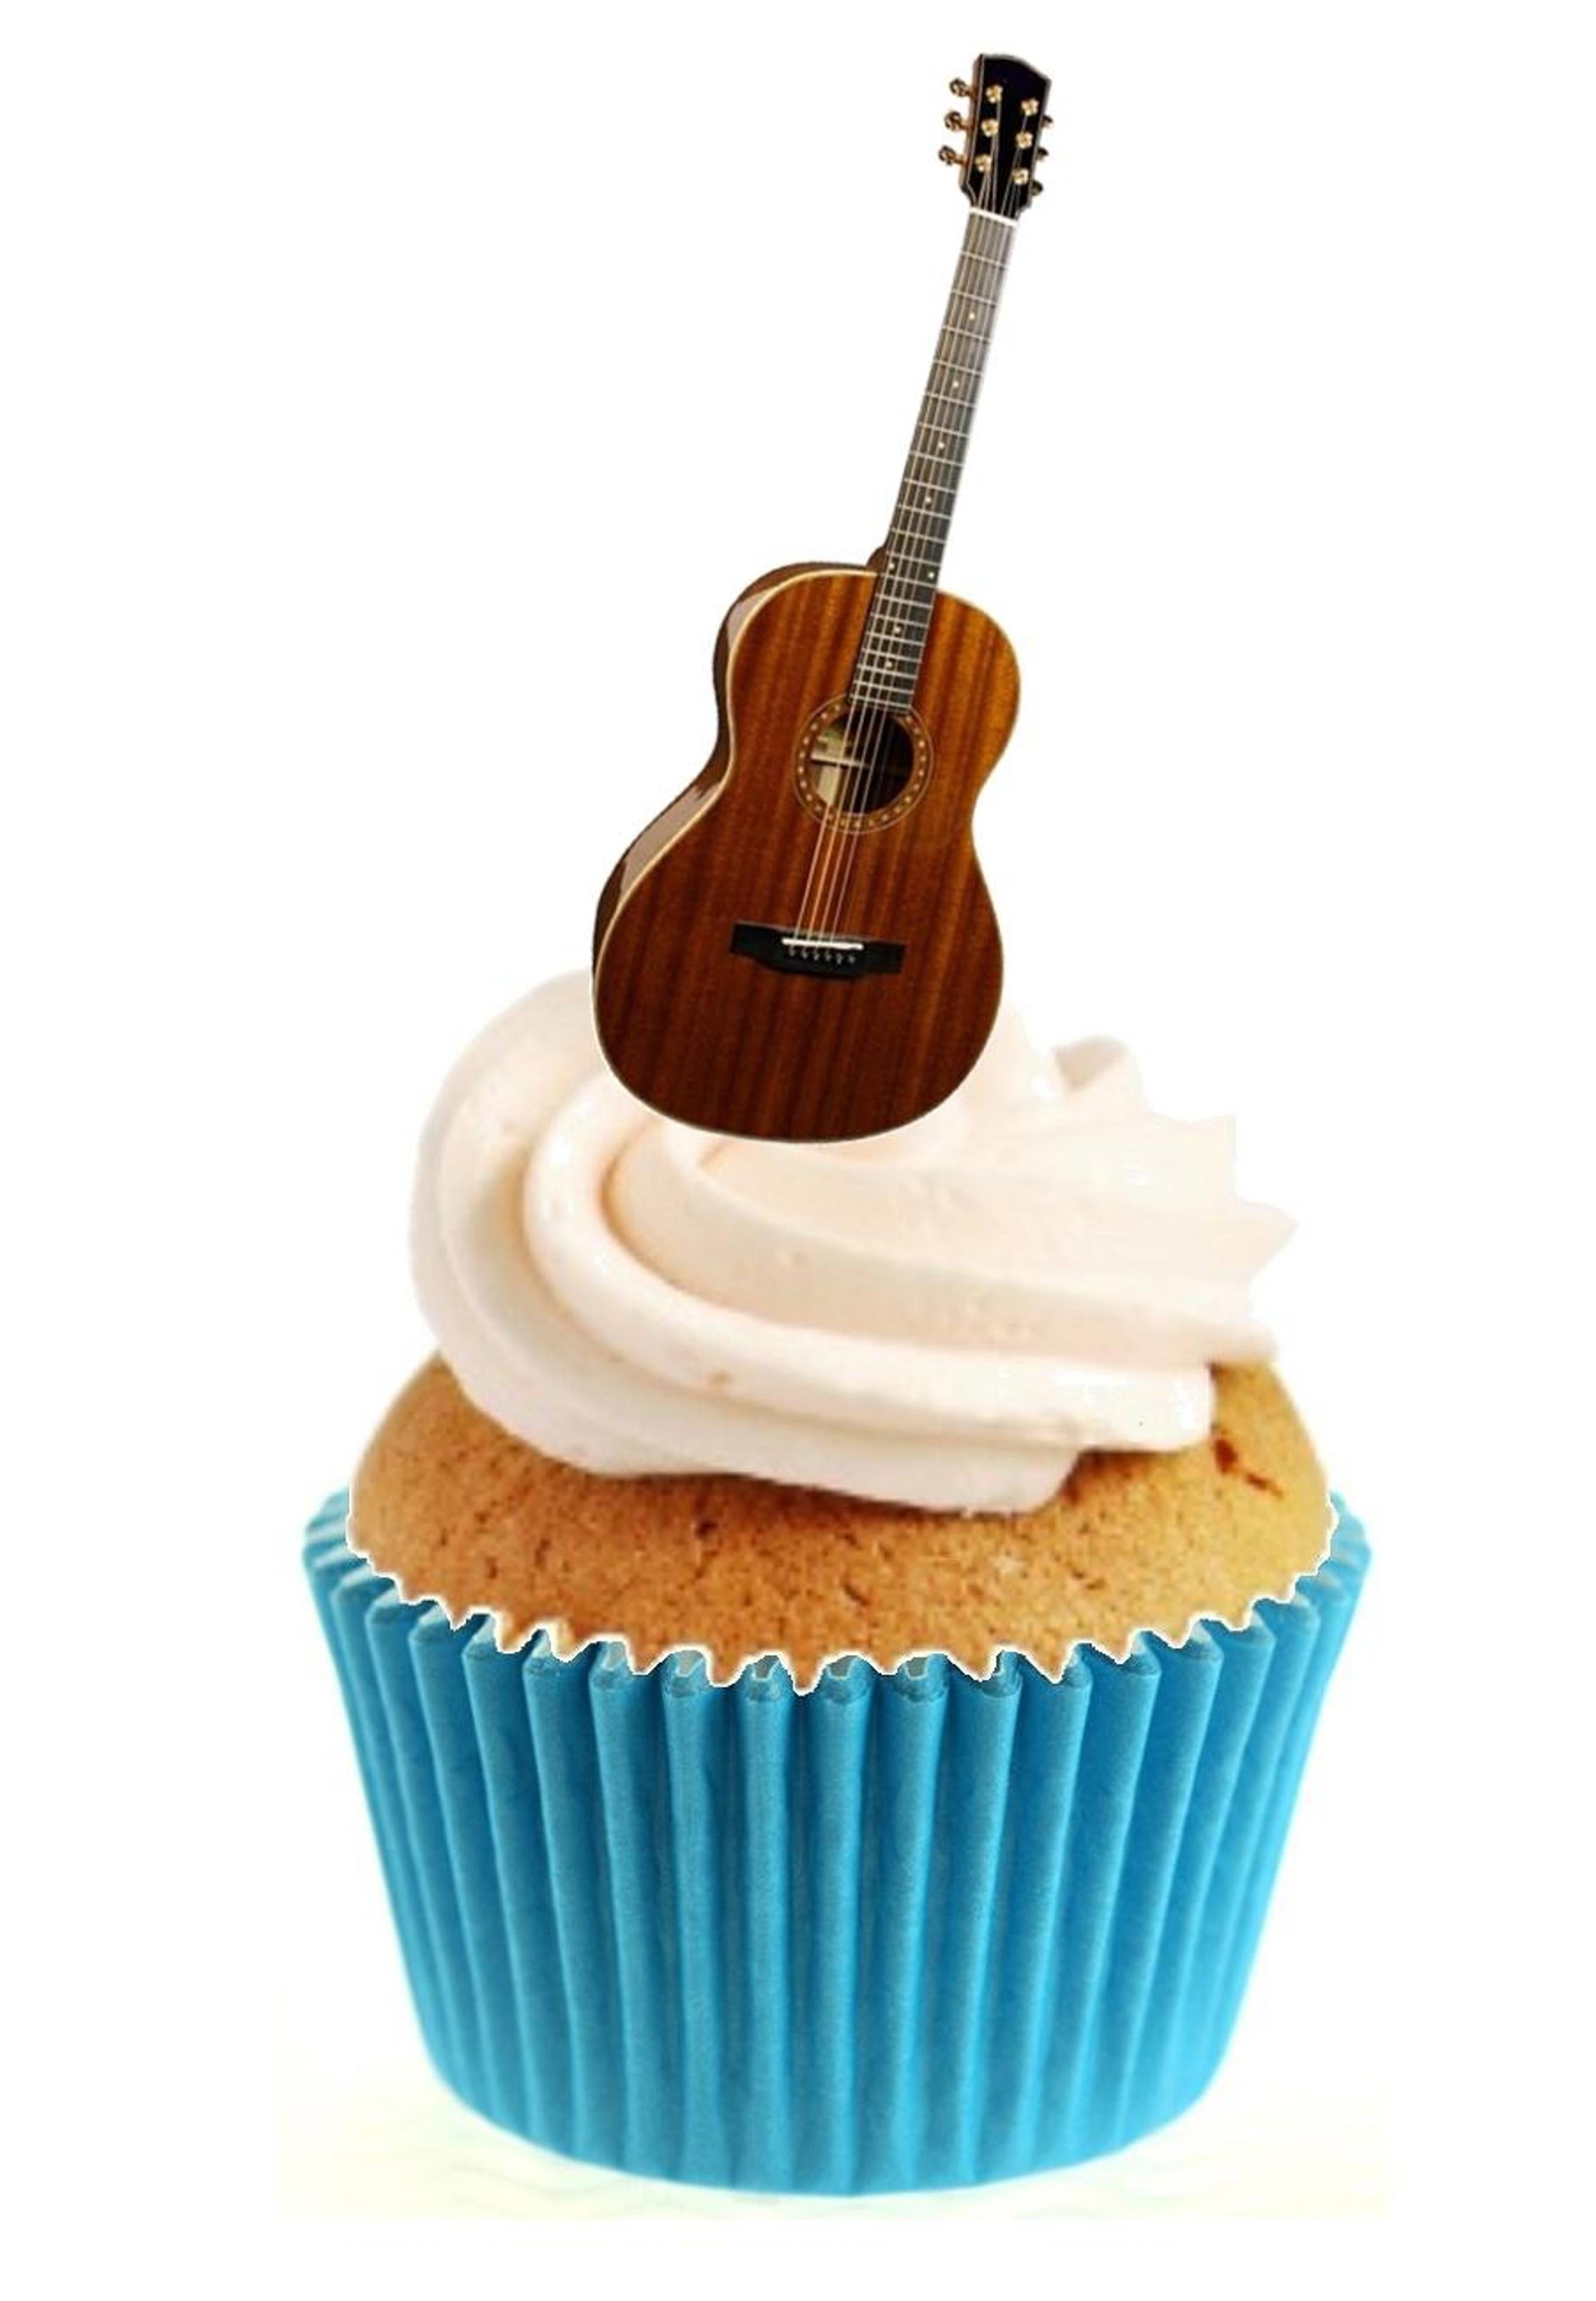 PRE-CUT Acoustic Guitars Cake Decorations - 12 Edible Wafer Cup Cake  Toppers : Amazon.co.uk: Grocery